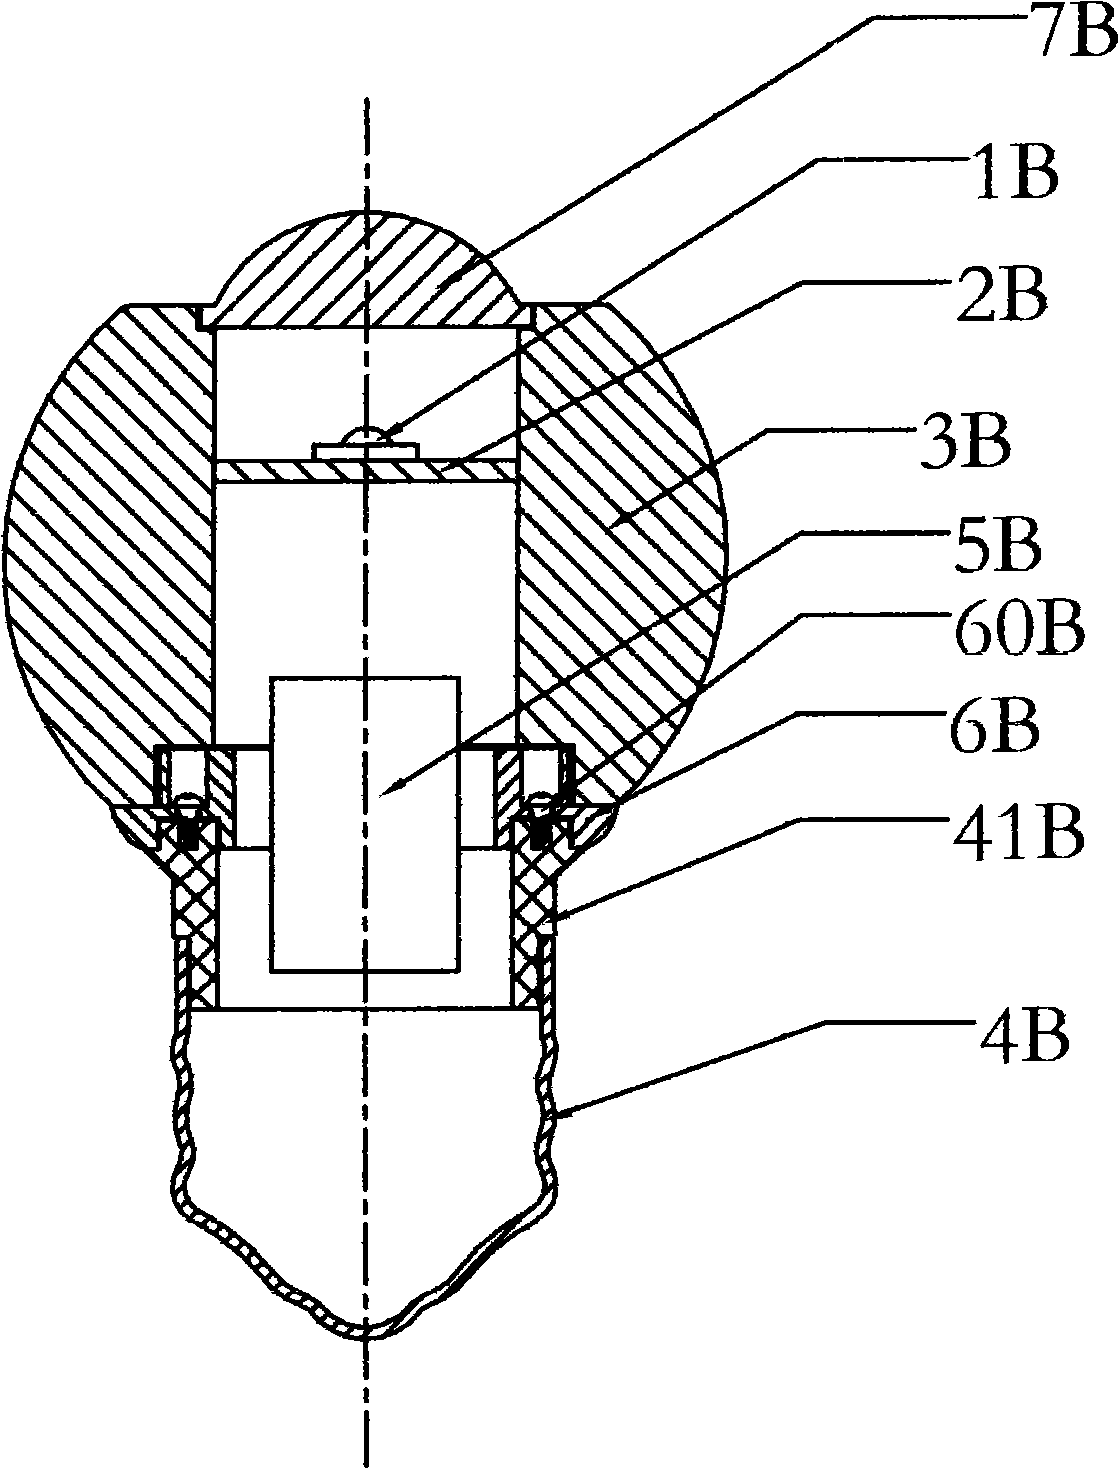 High-power LED lamp structure and manufacturing method thereof